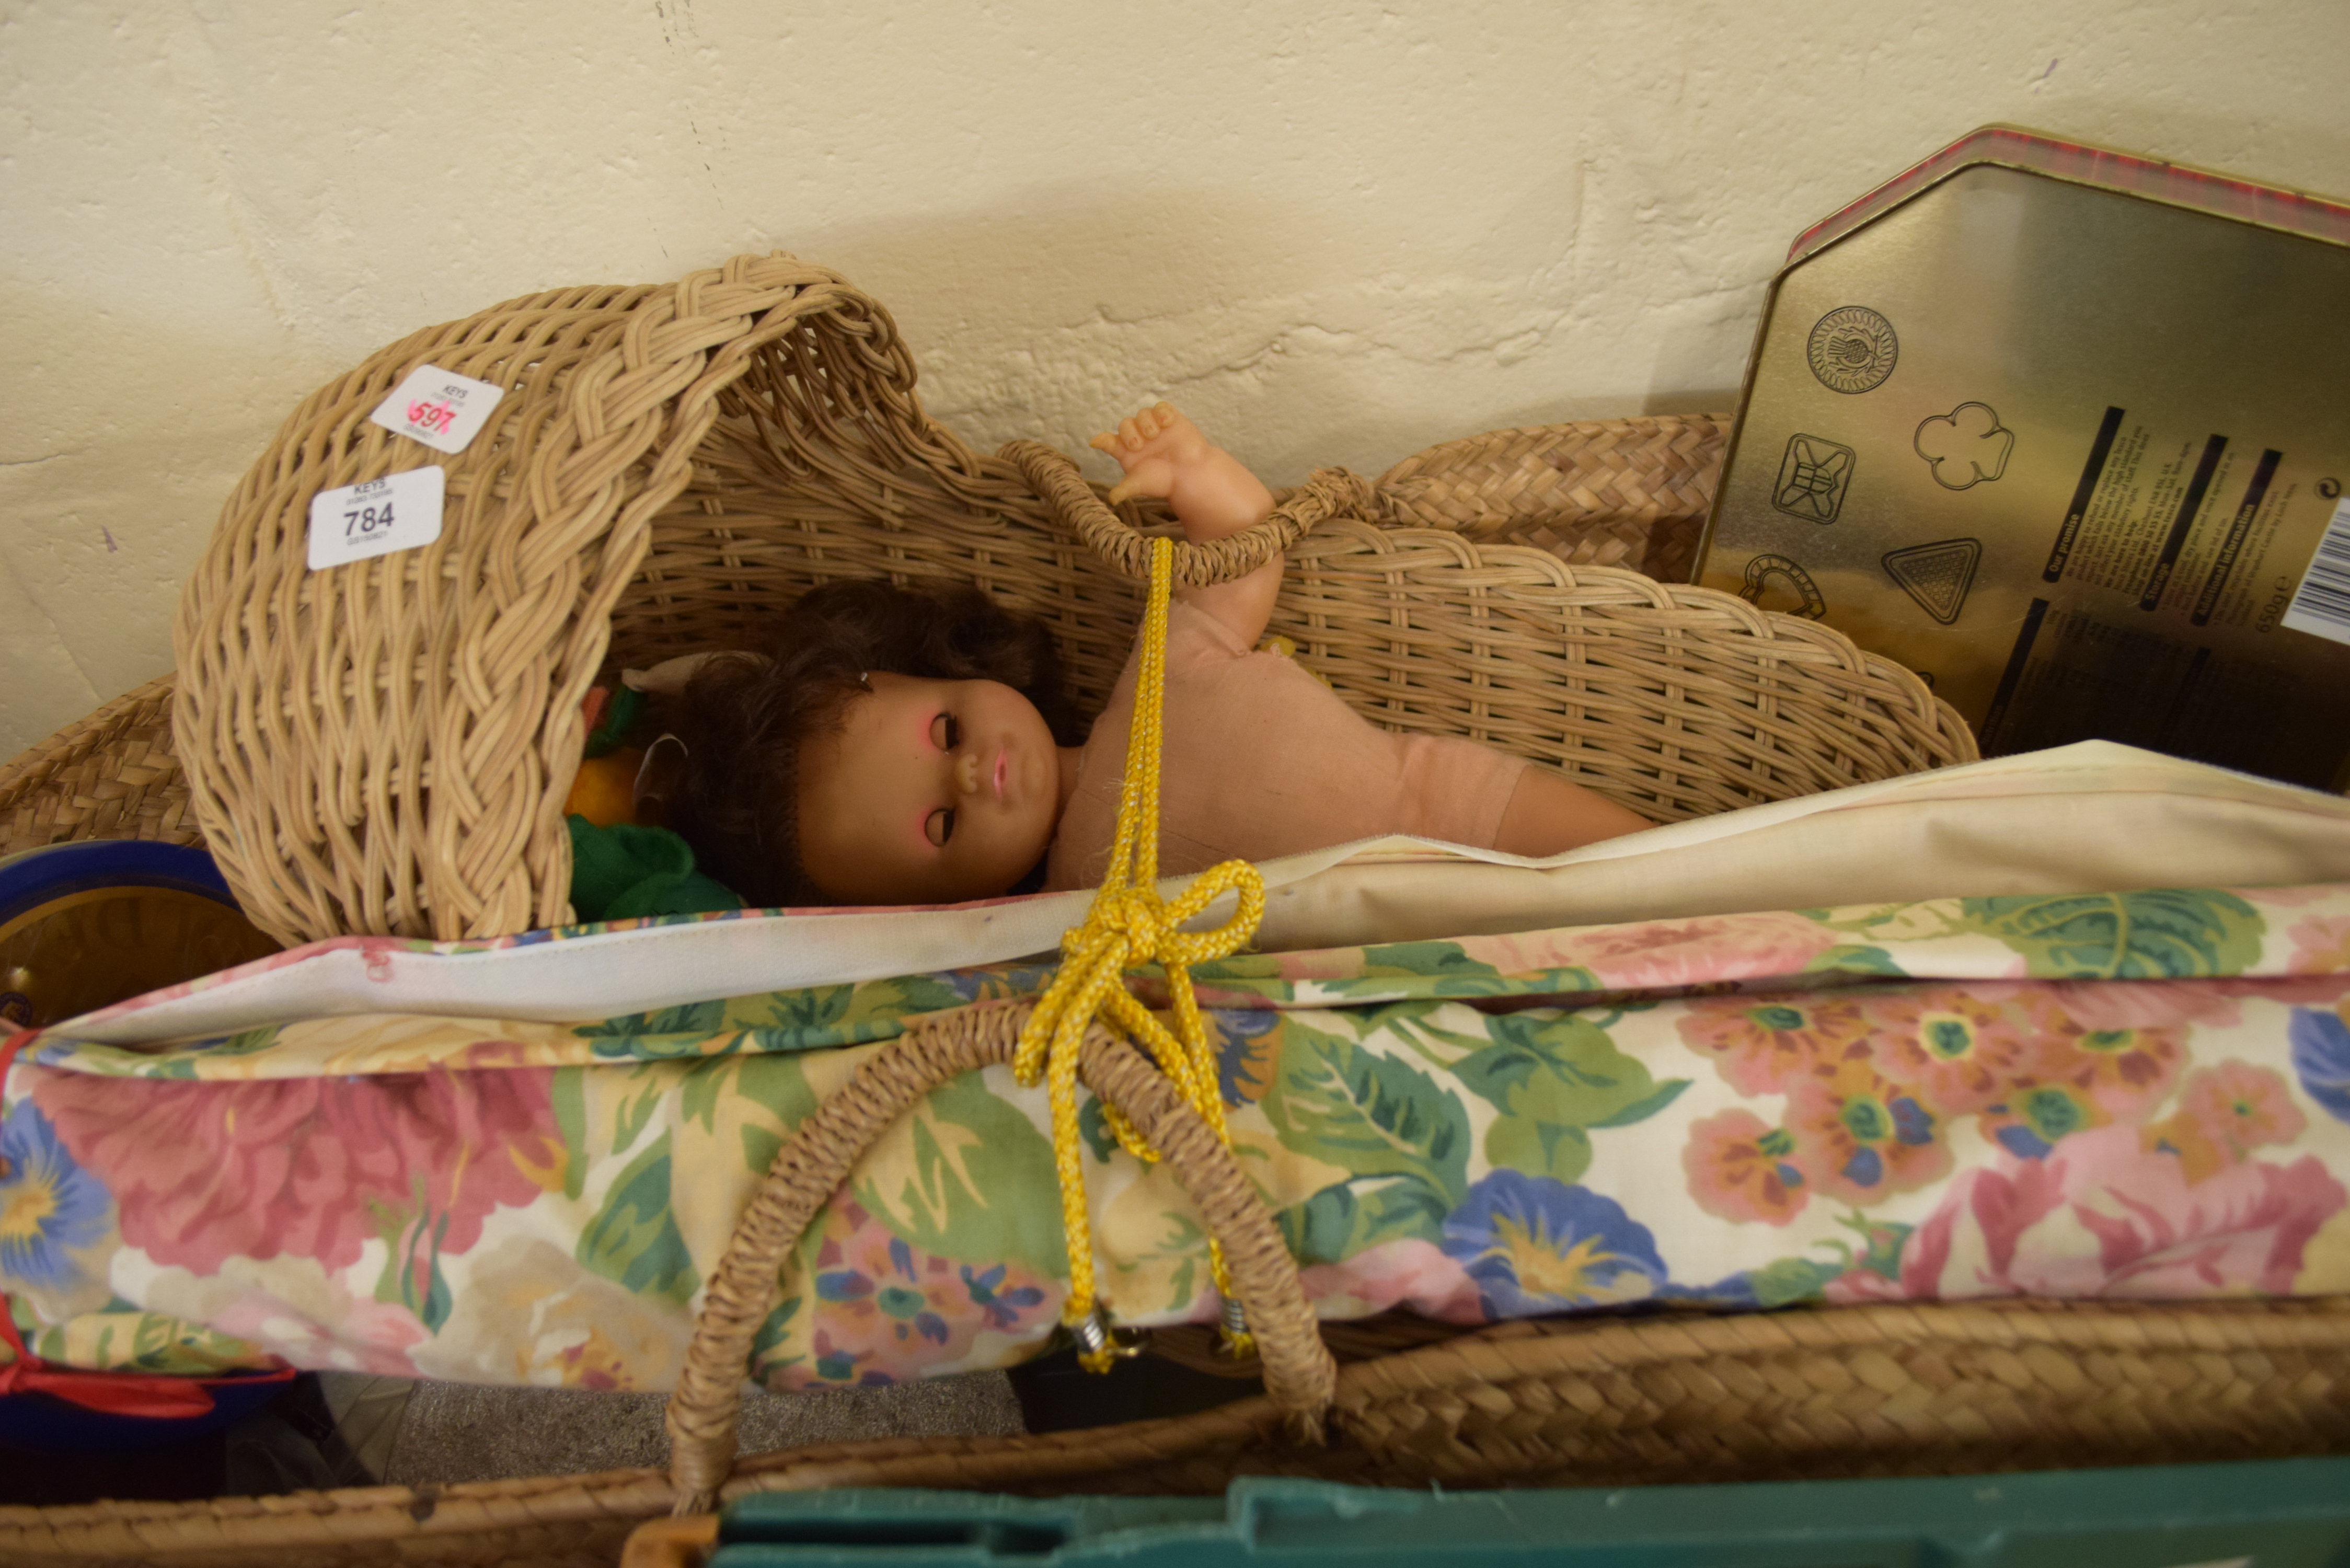 WICKER DOLLS COT CONTAINING DOLL, FABRIC BLIND, SUNDRIES ETC